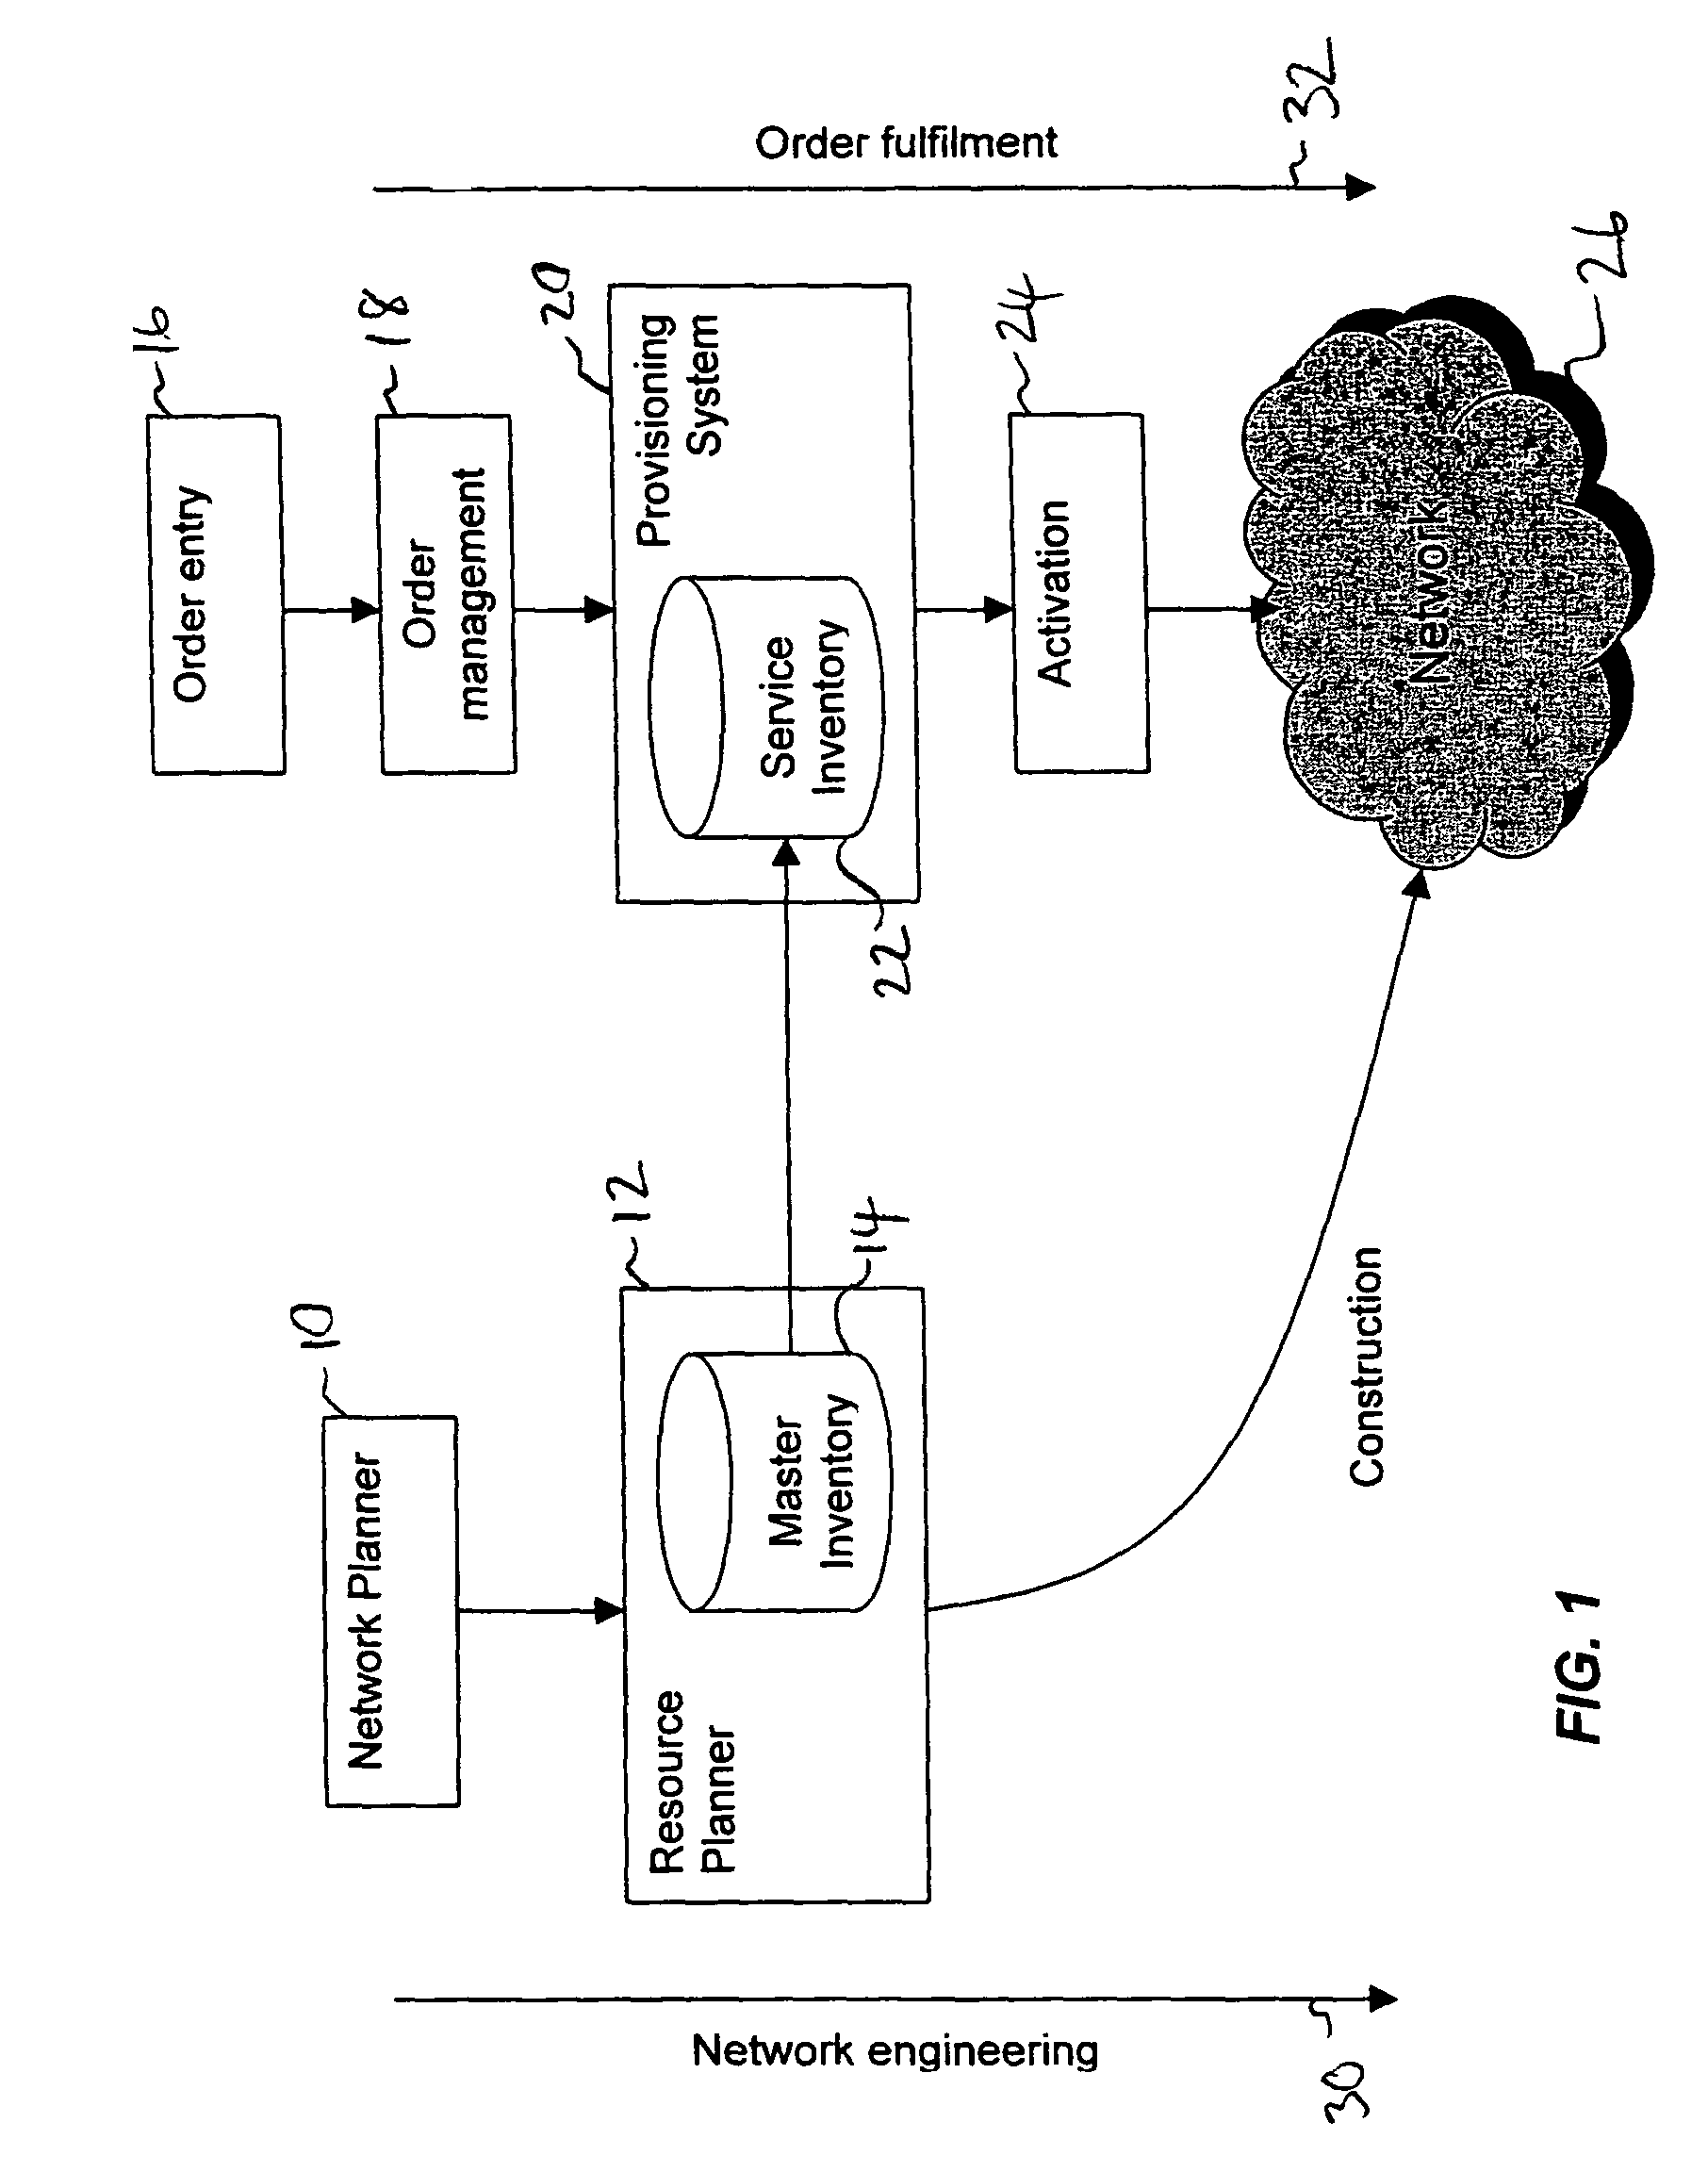 Method and system for telecommunications network planning and management